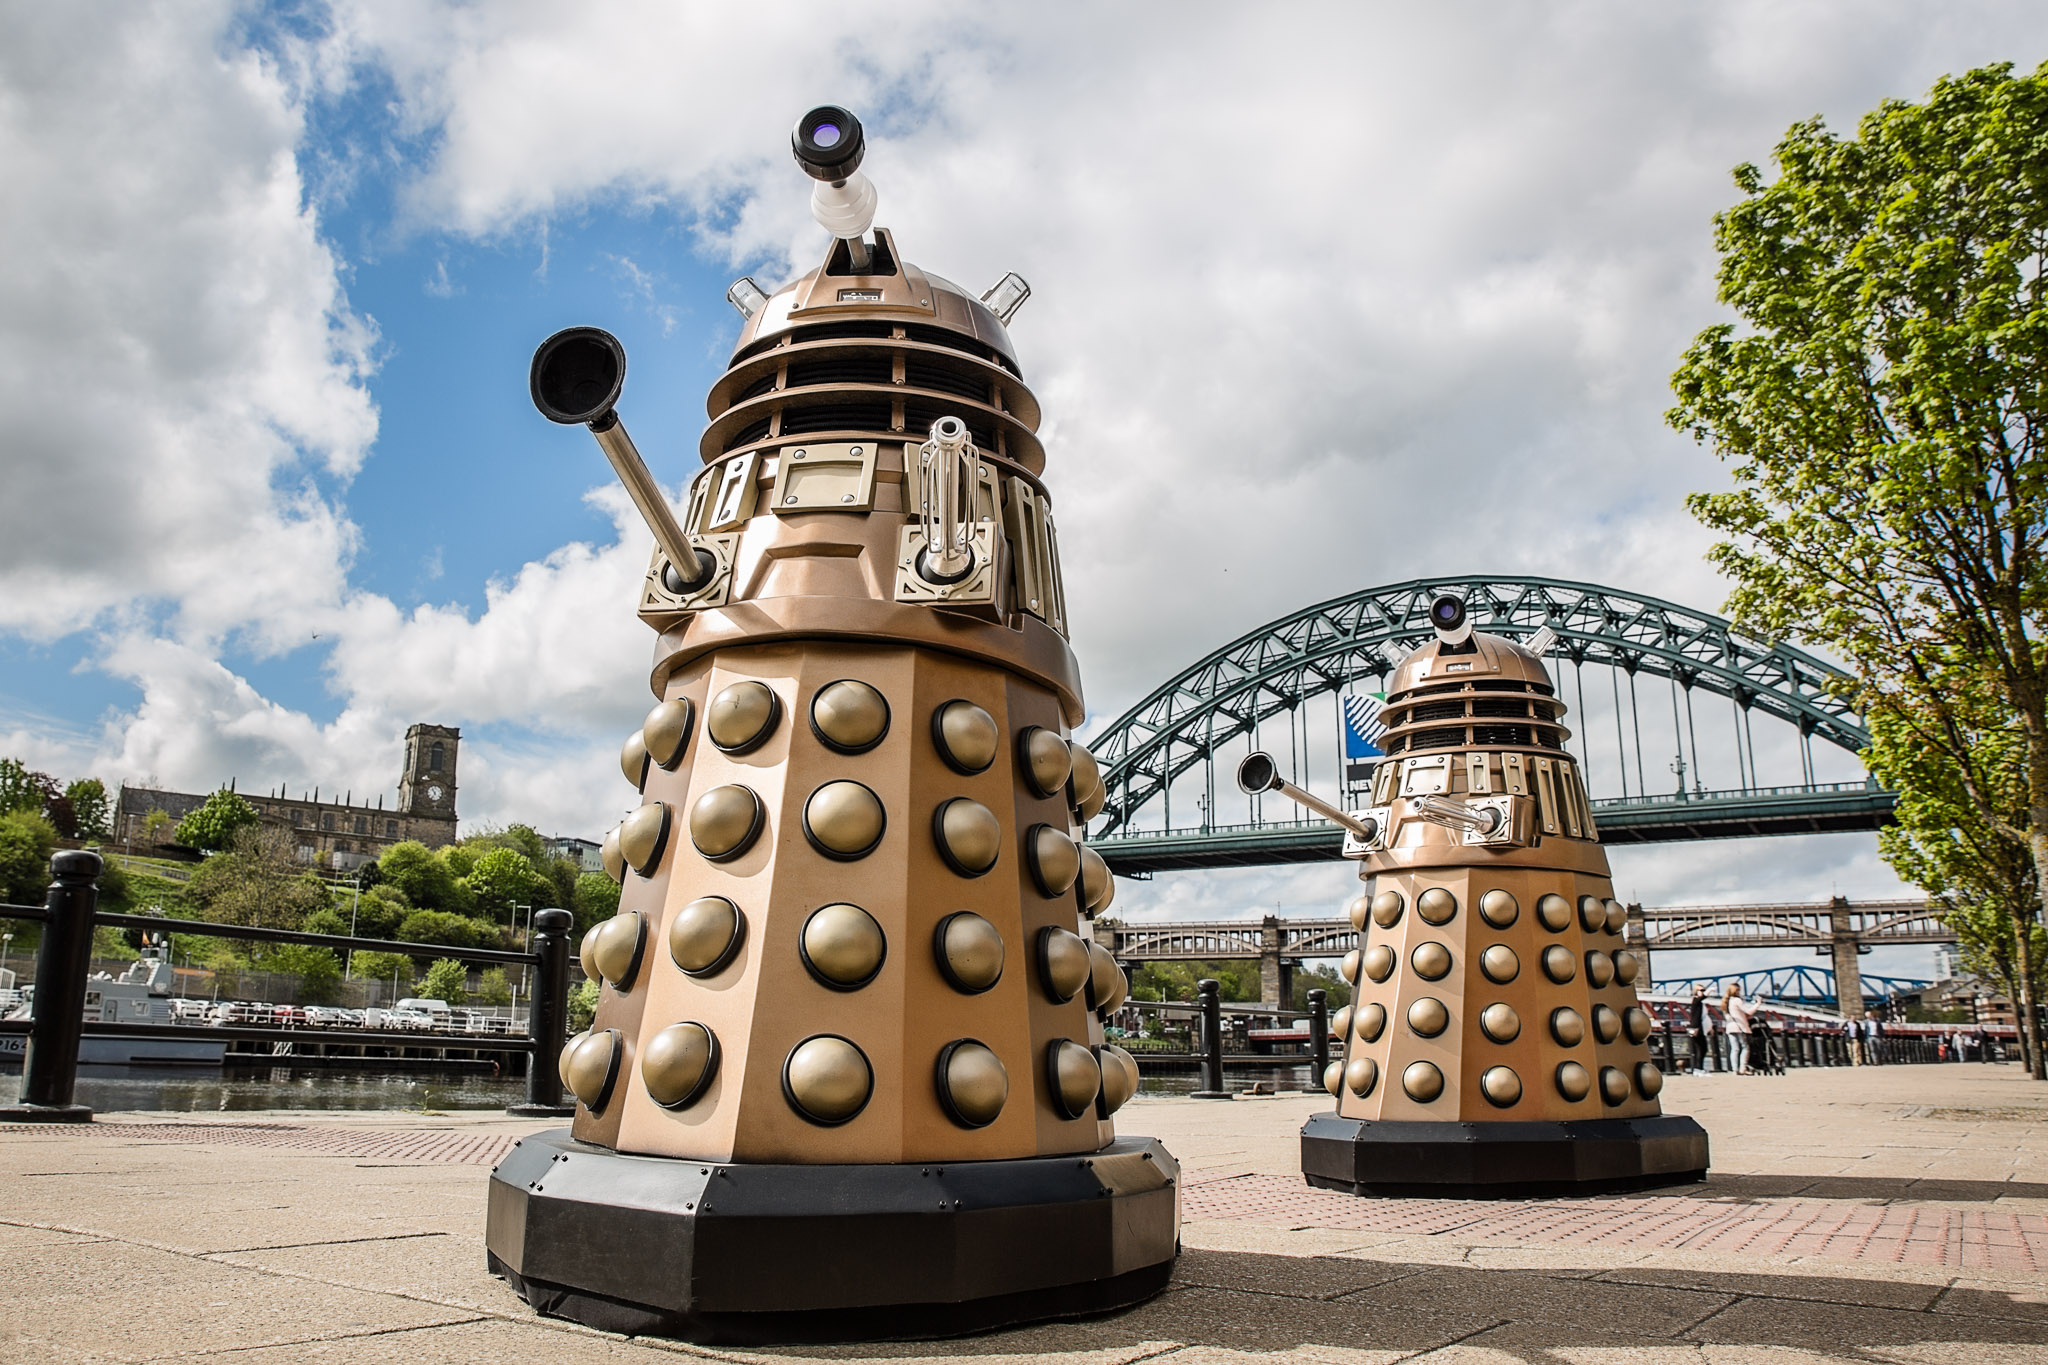 Two of the Symphonic Spectacular Daleks in Newcastle in 2015.